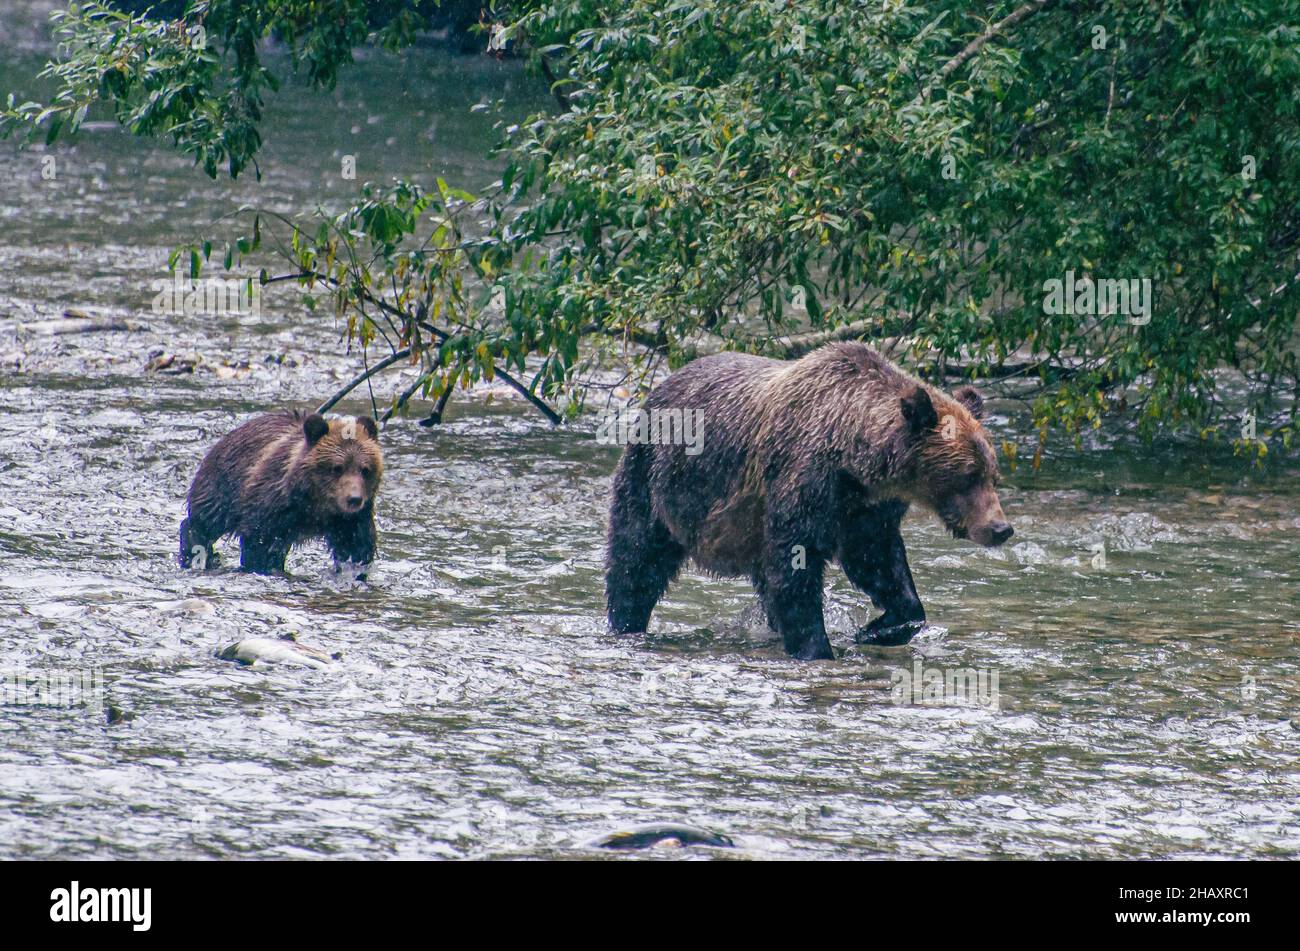 Grizzly bear and her Cub walking in a river, British Columbia, Canada Stock Photo